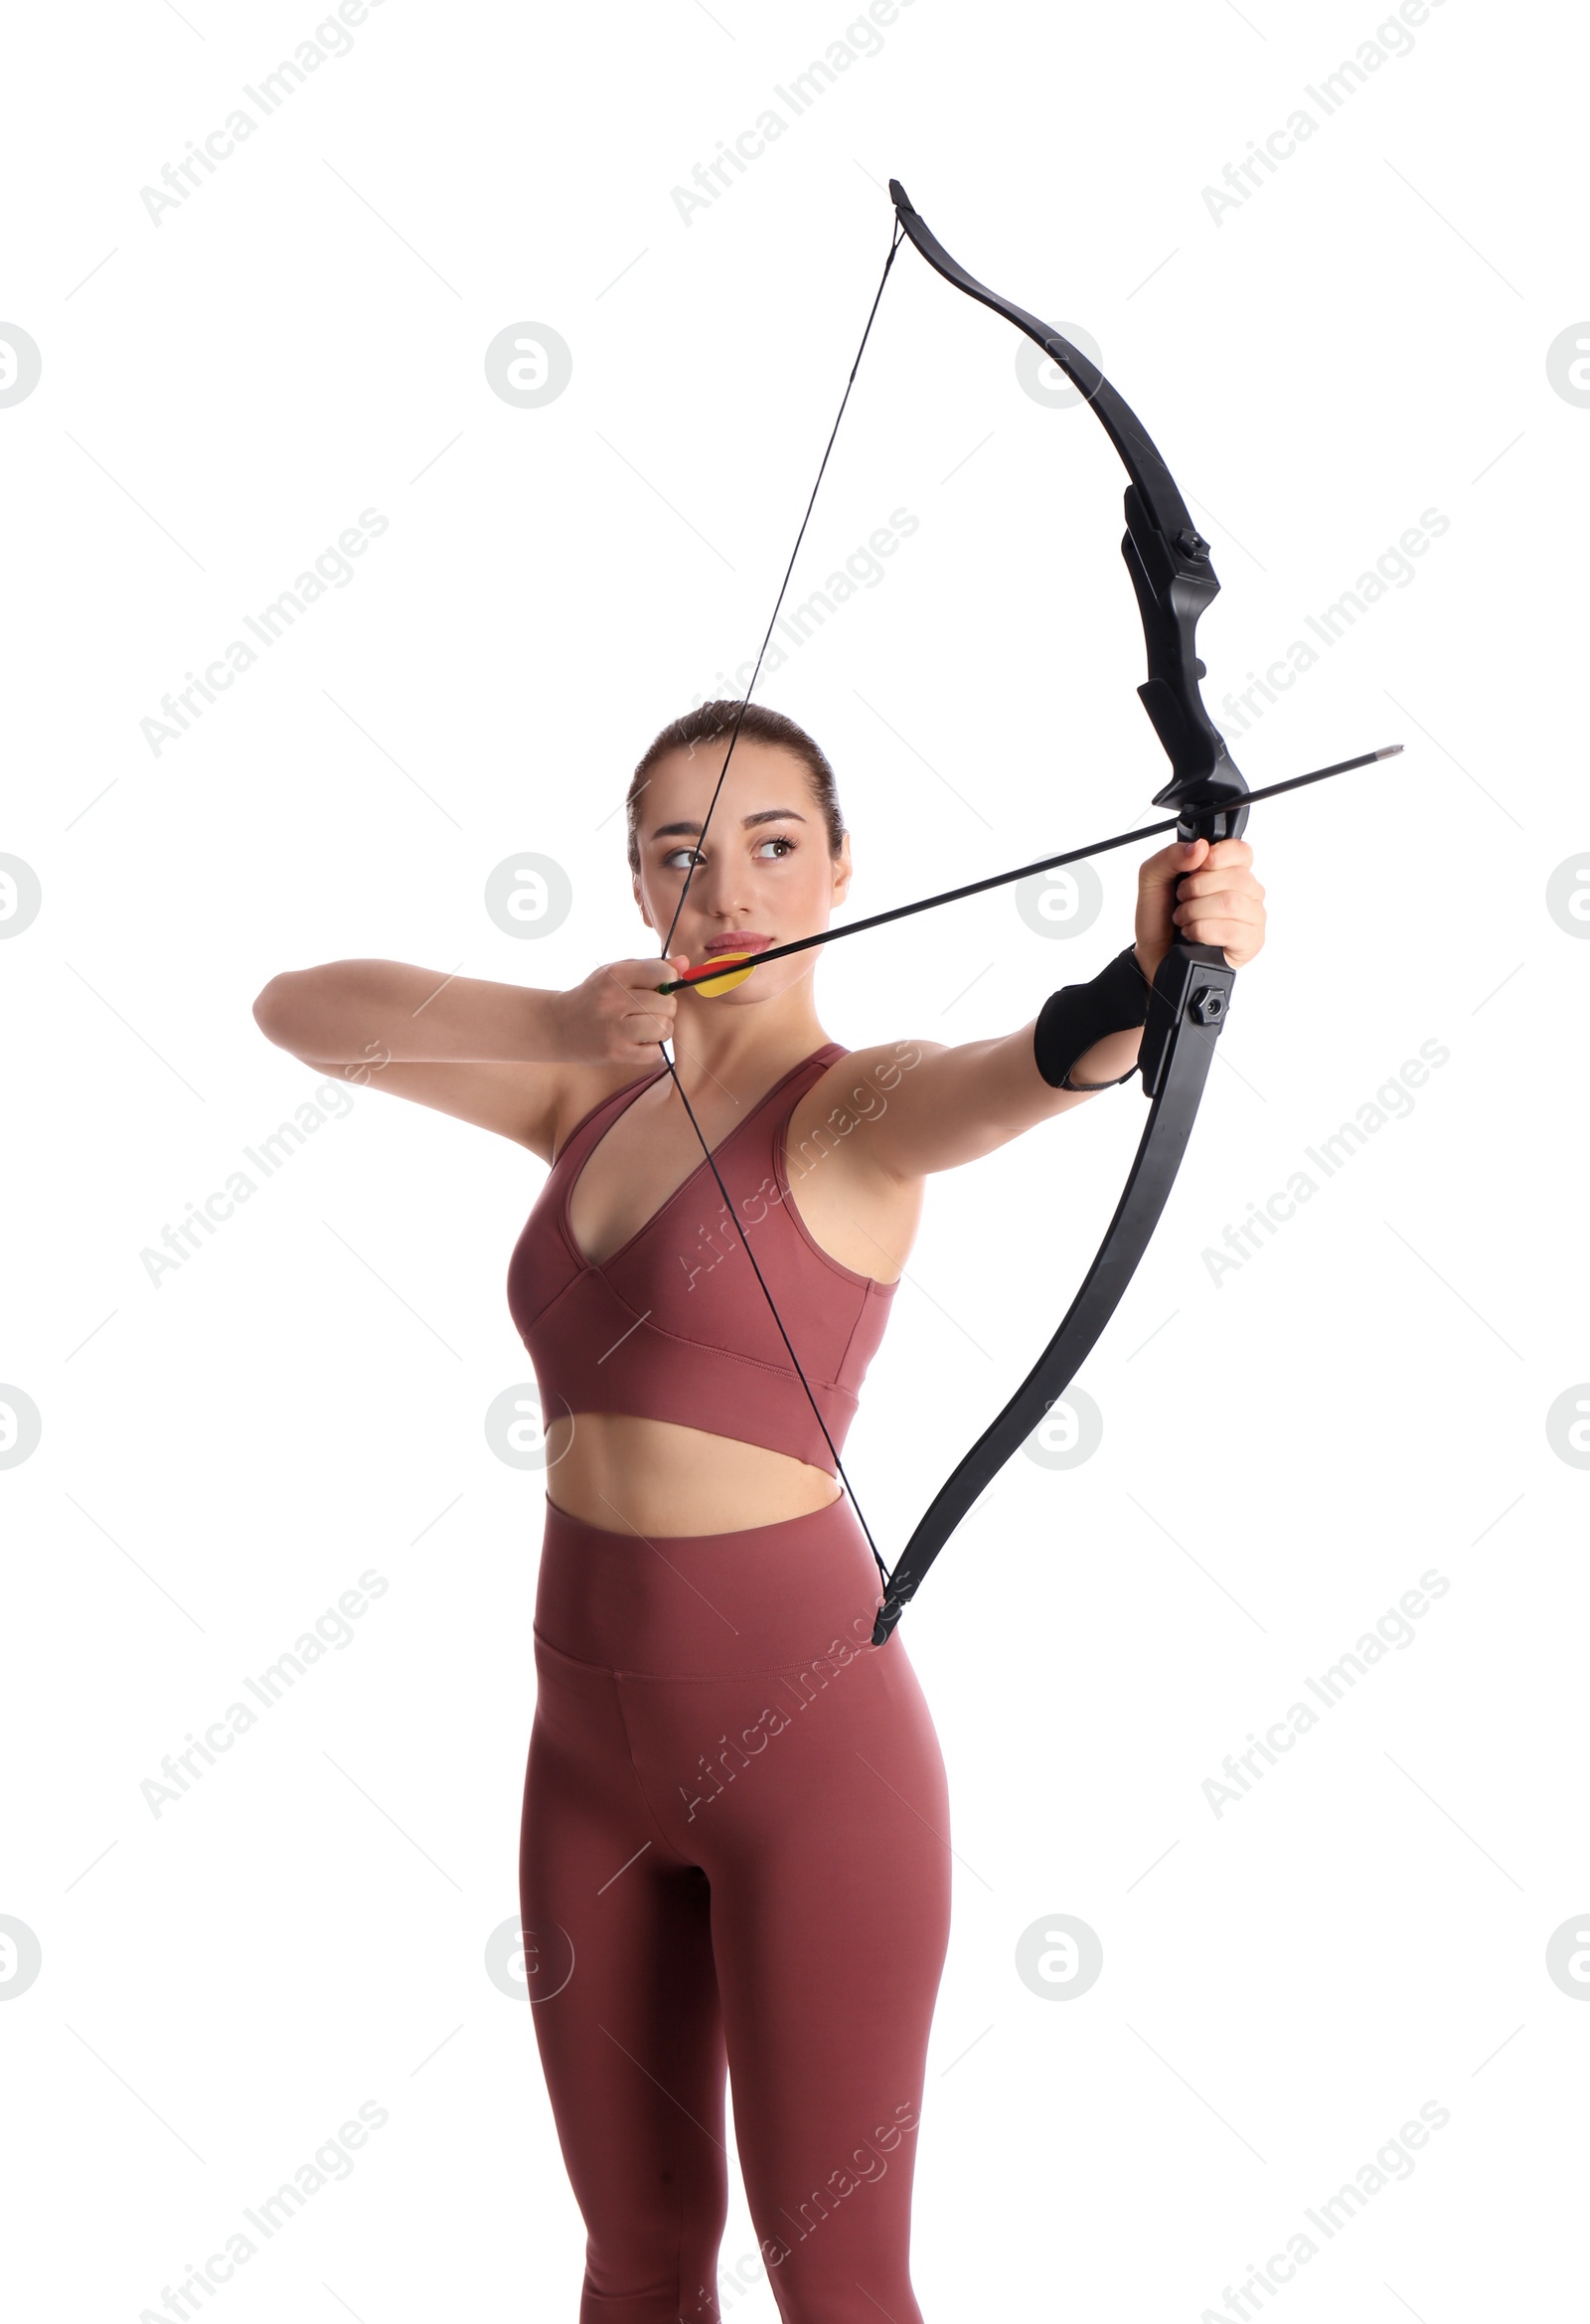 Photo of Woman with bow and arrow practicing archery on white background